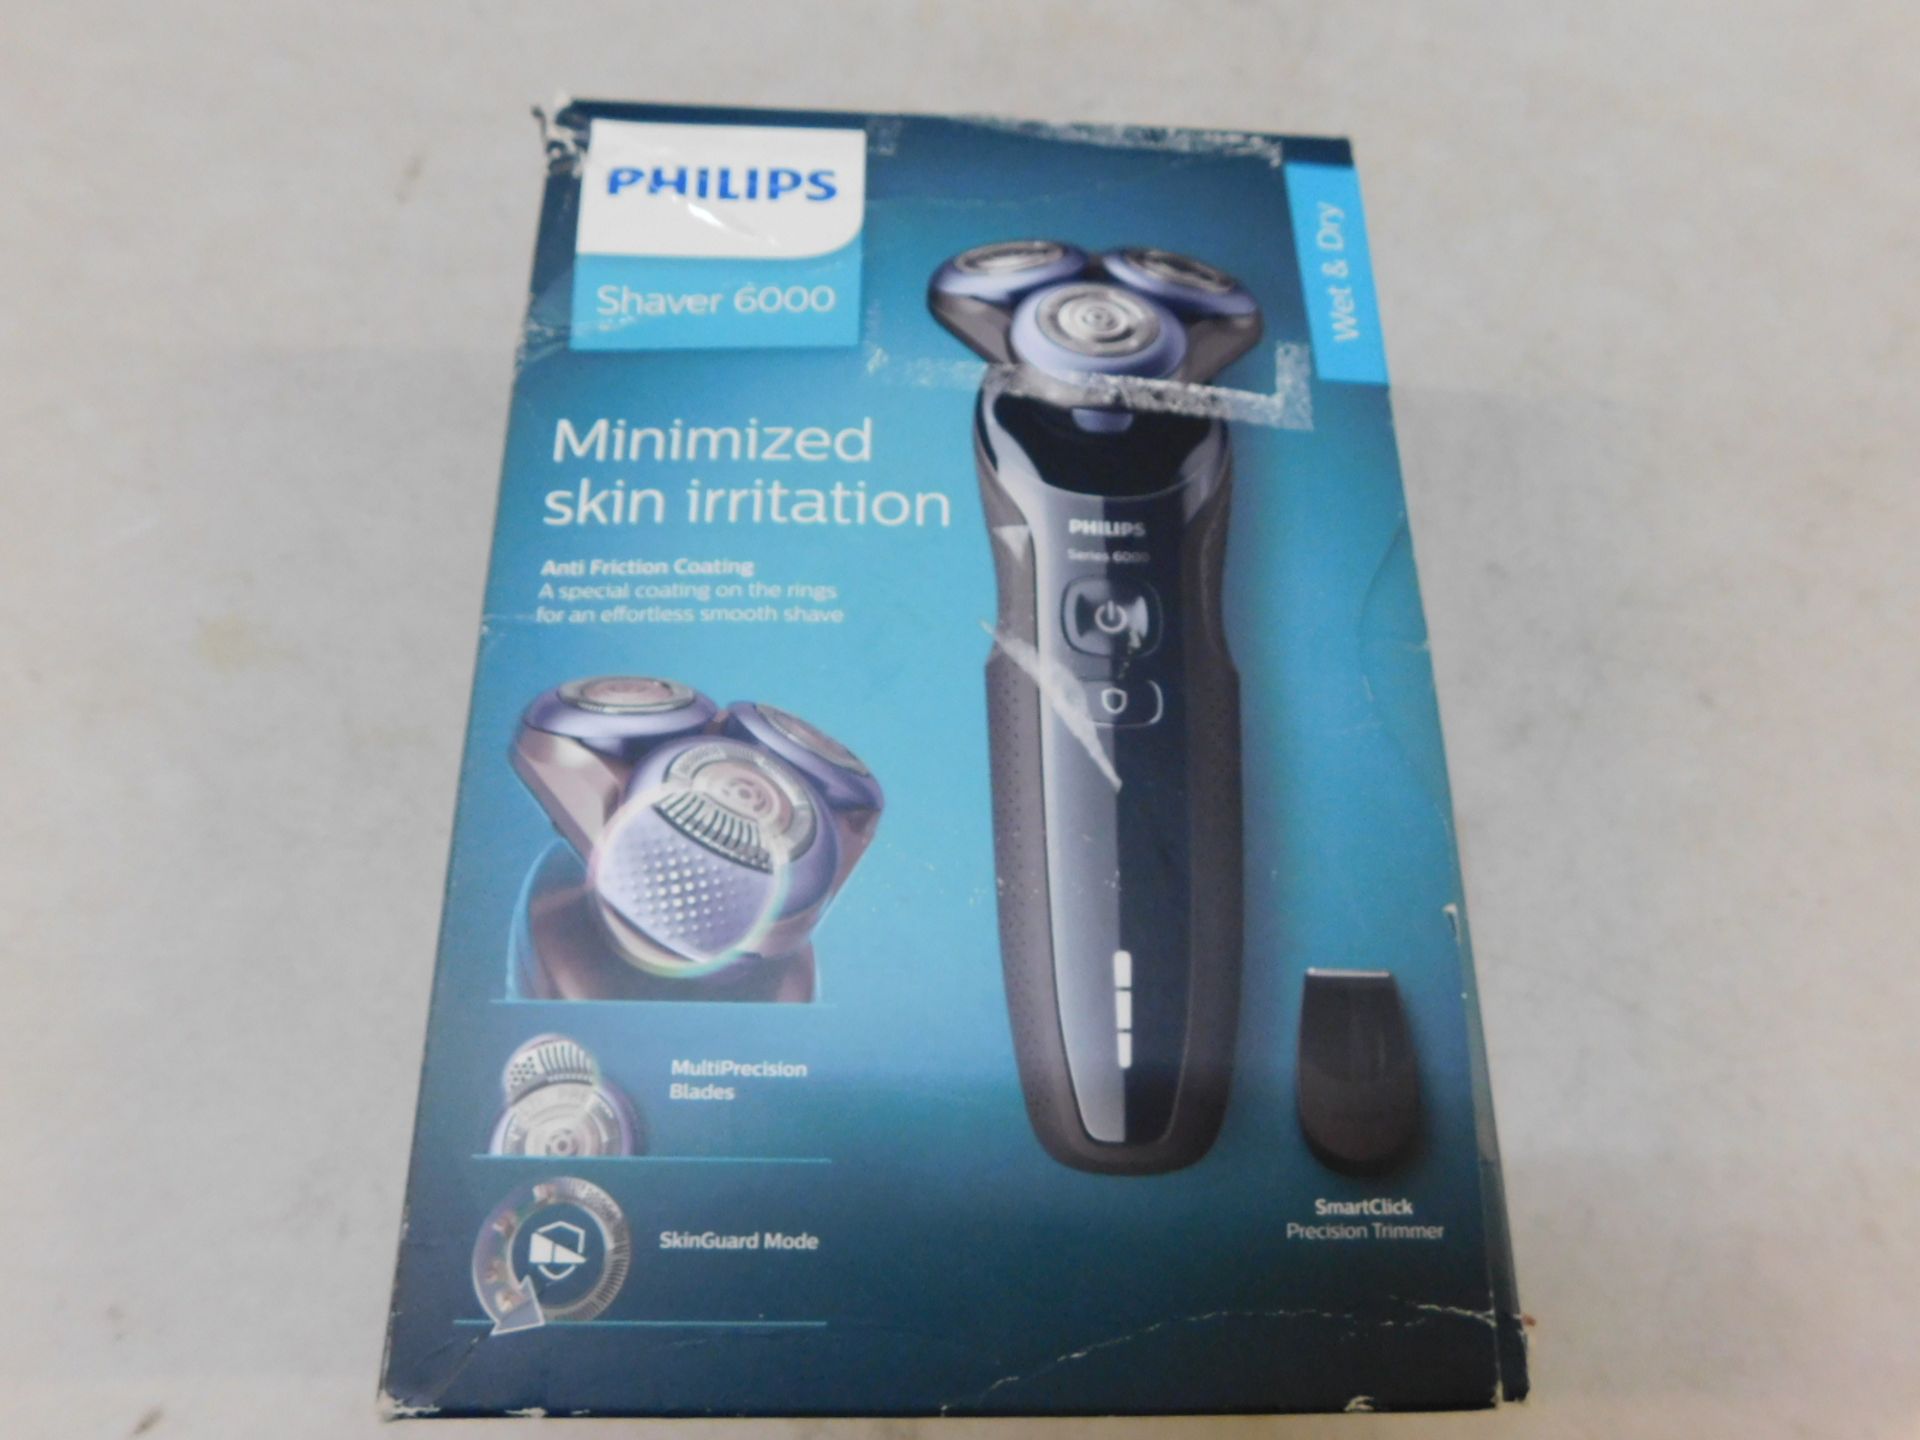 1 BOXED PHILLIPS WET AND DRY SHAVER 6000 MODEL S6630/11 RRP Â£129.99